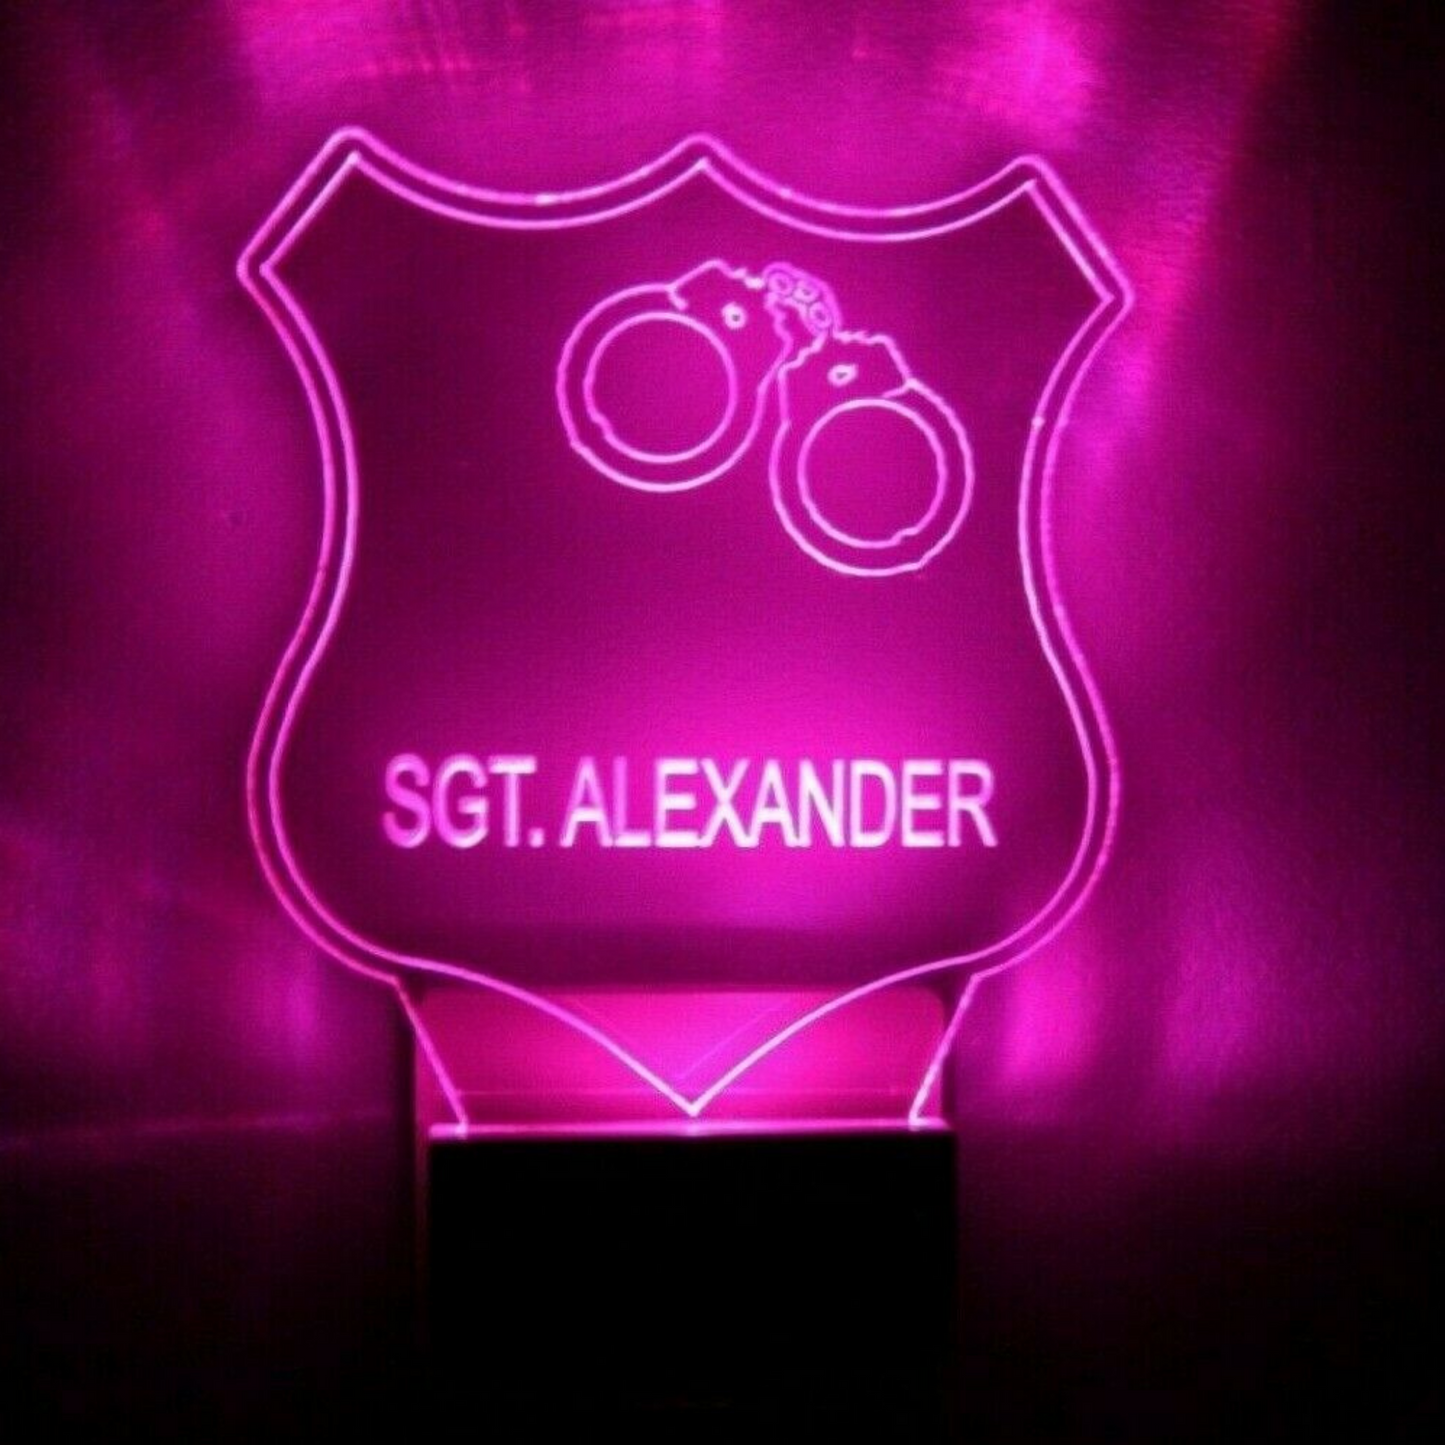 Police Badge Night Light Multi Color Personalized LED Wall Plug-in Cool-Touch Smart Dusk to Dawn Sensor